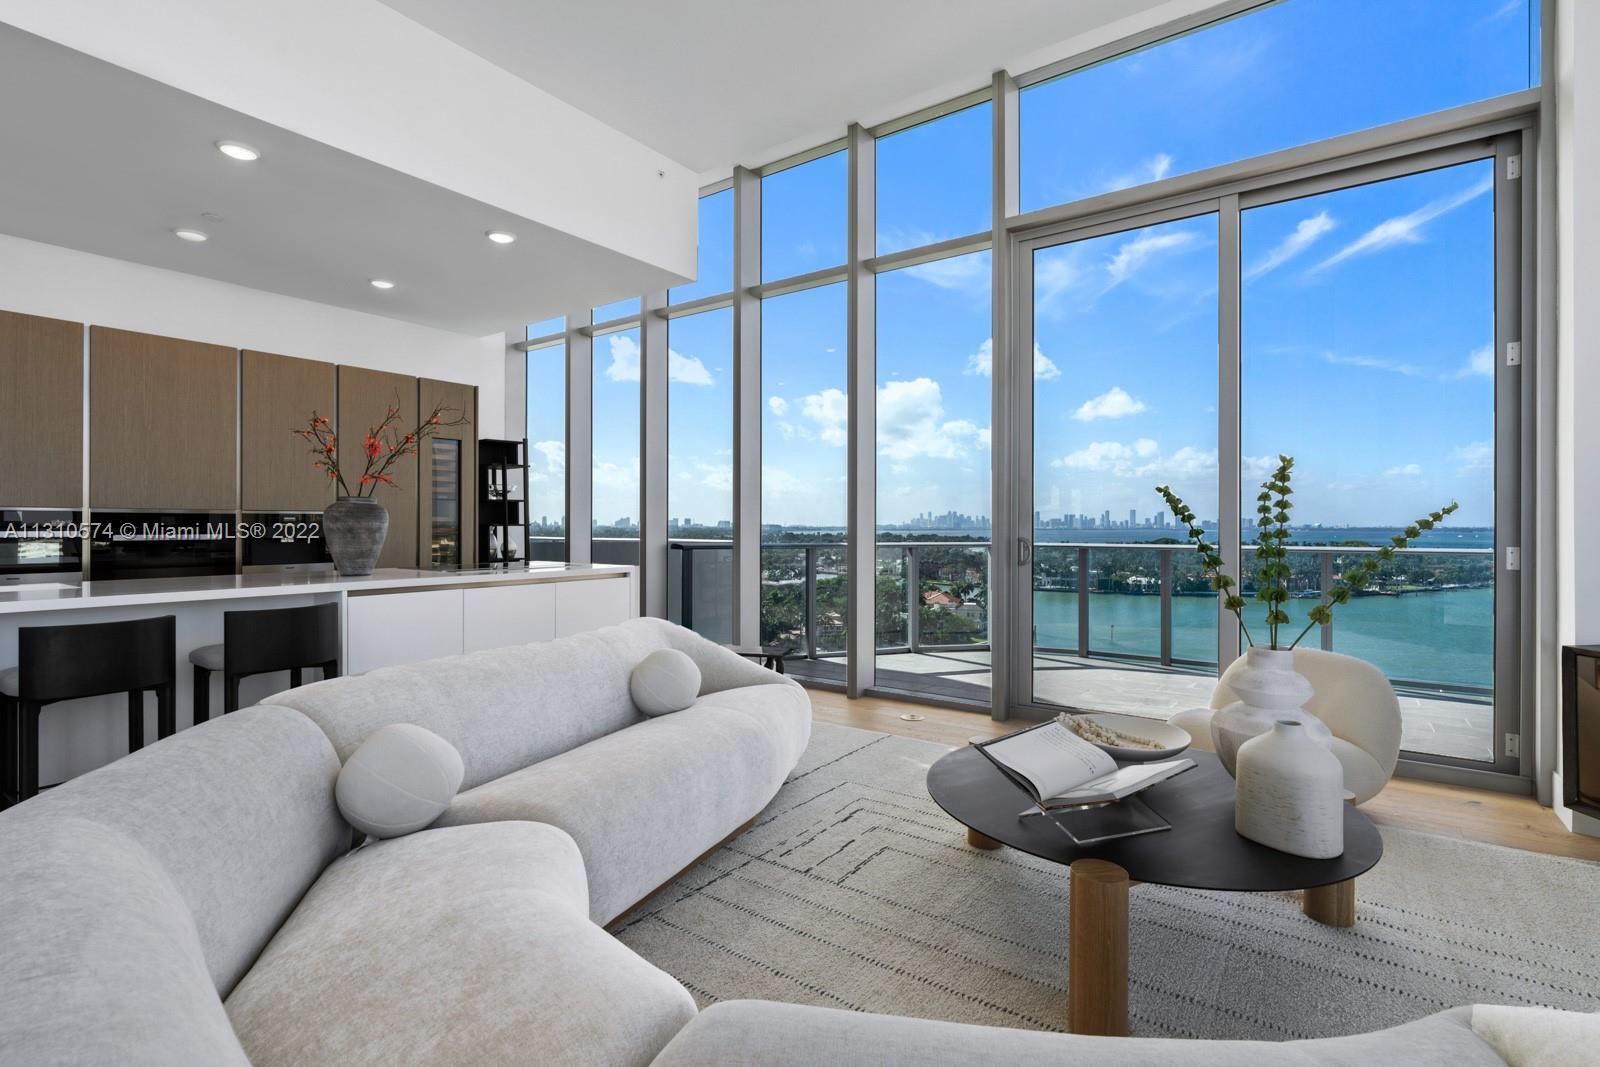 Step Inside With Me! The Penthouse at Monaco Yacht Club is the newest premier residence in Miami Bea